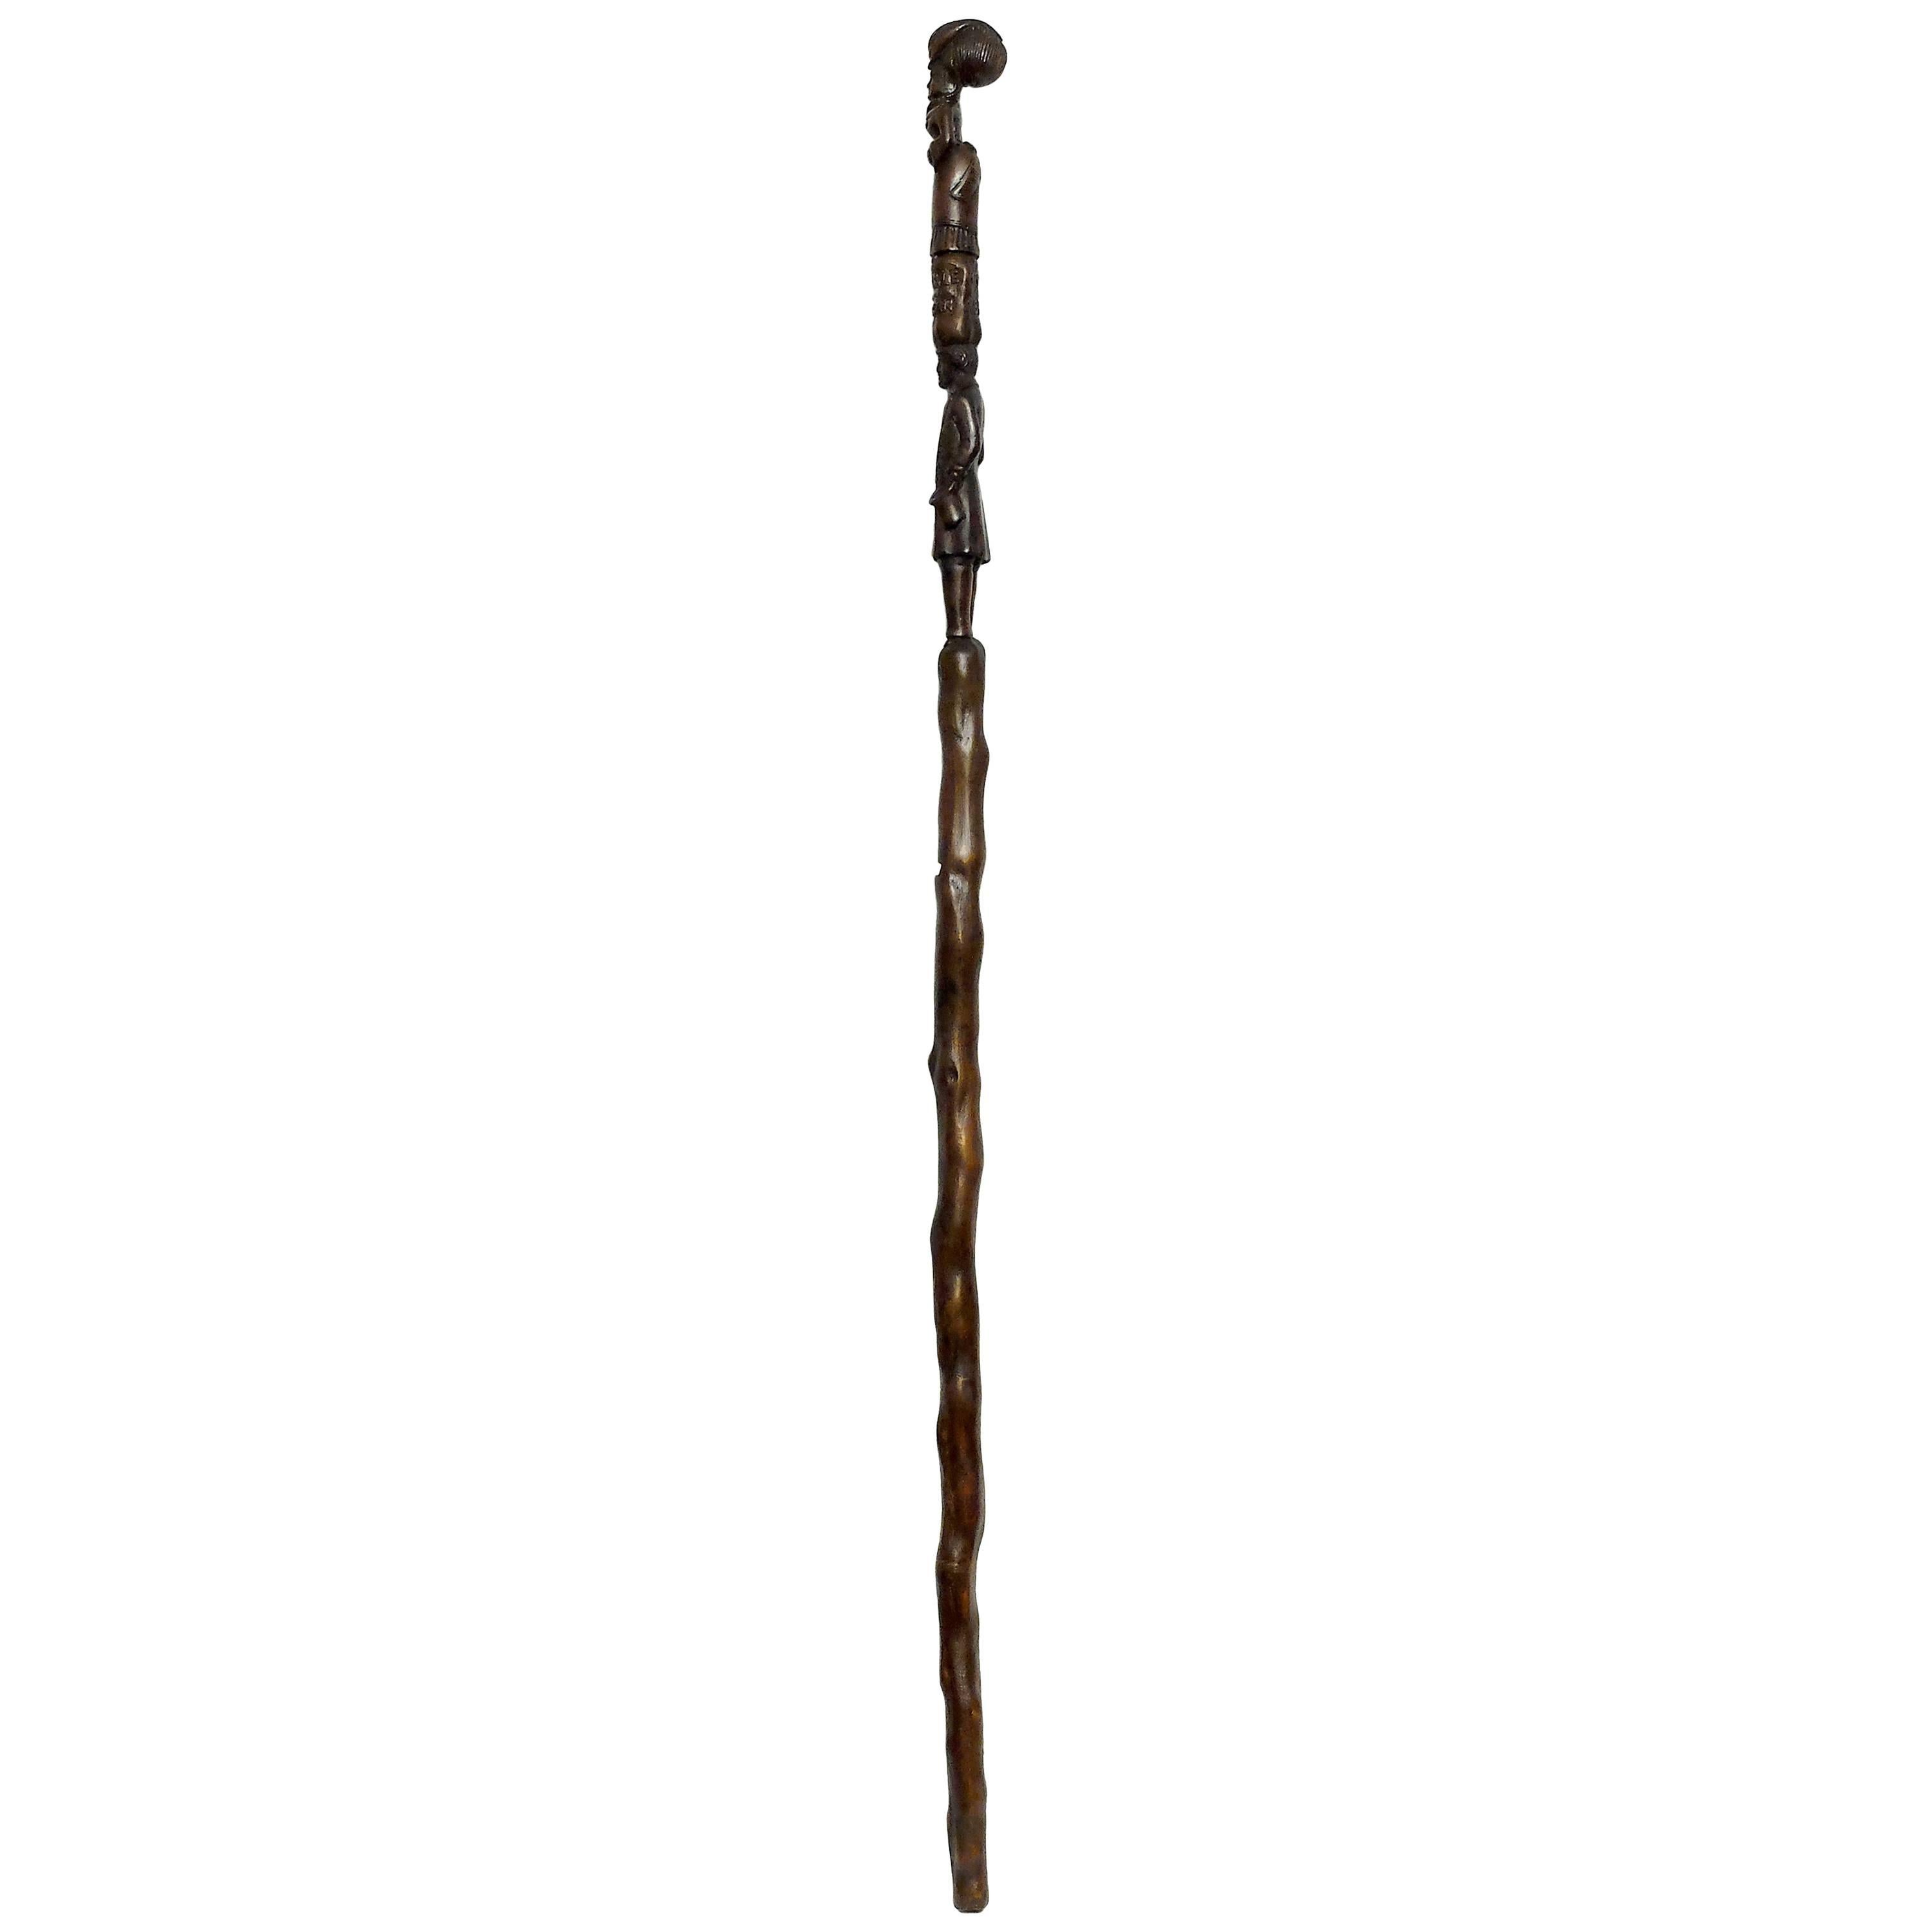 Rare Folk Art Walking Cane Related to a Marriage, England, 1868